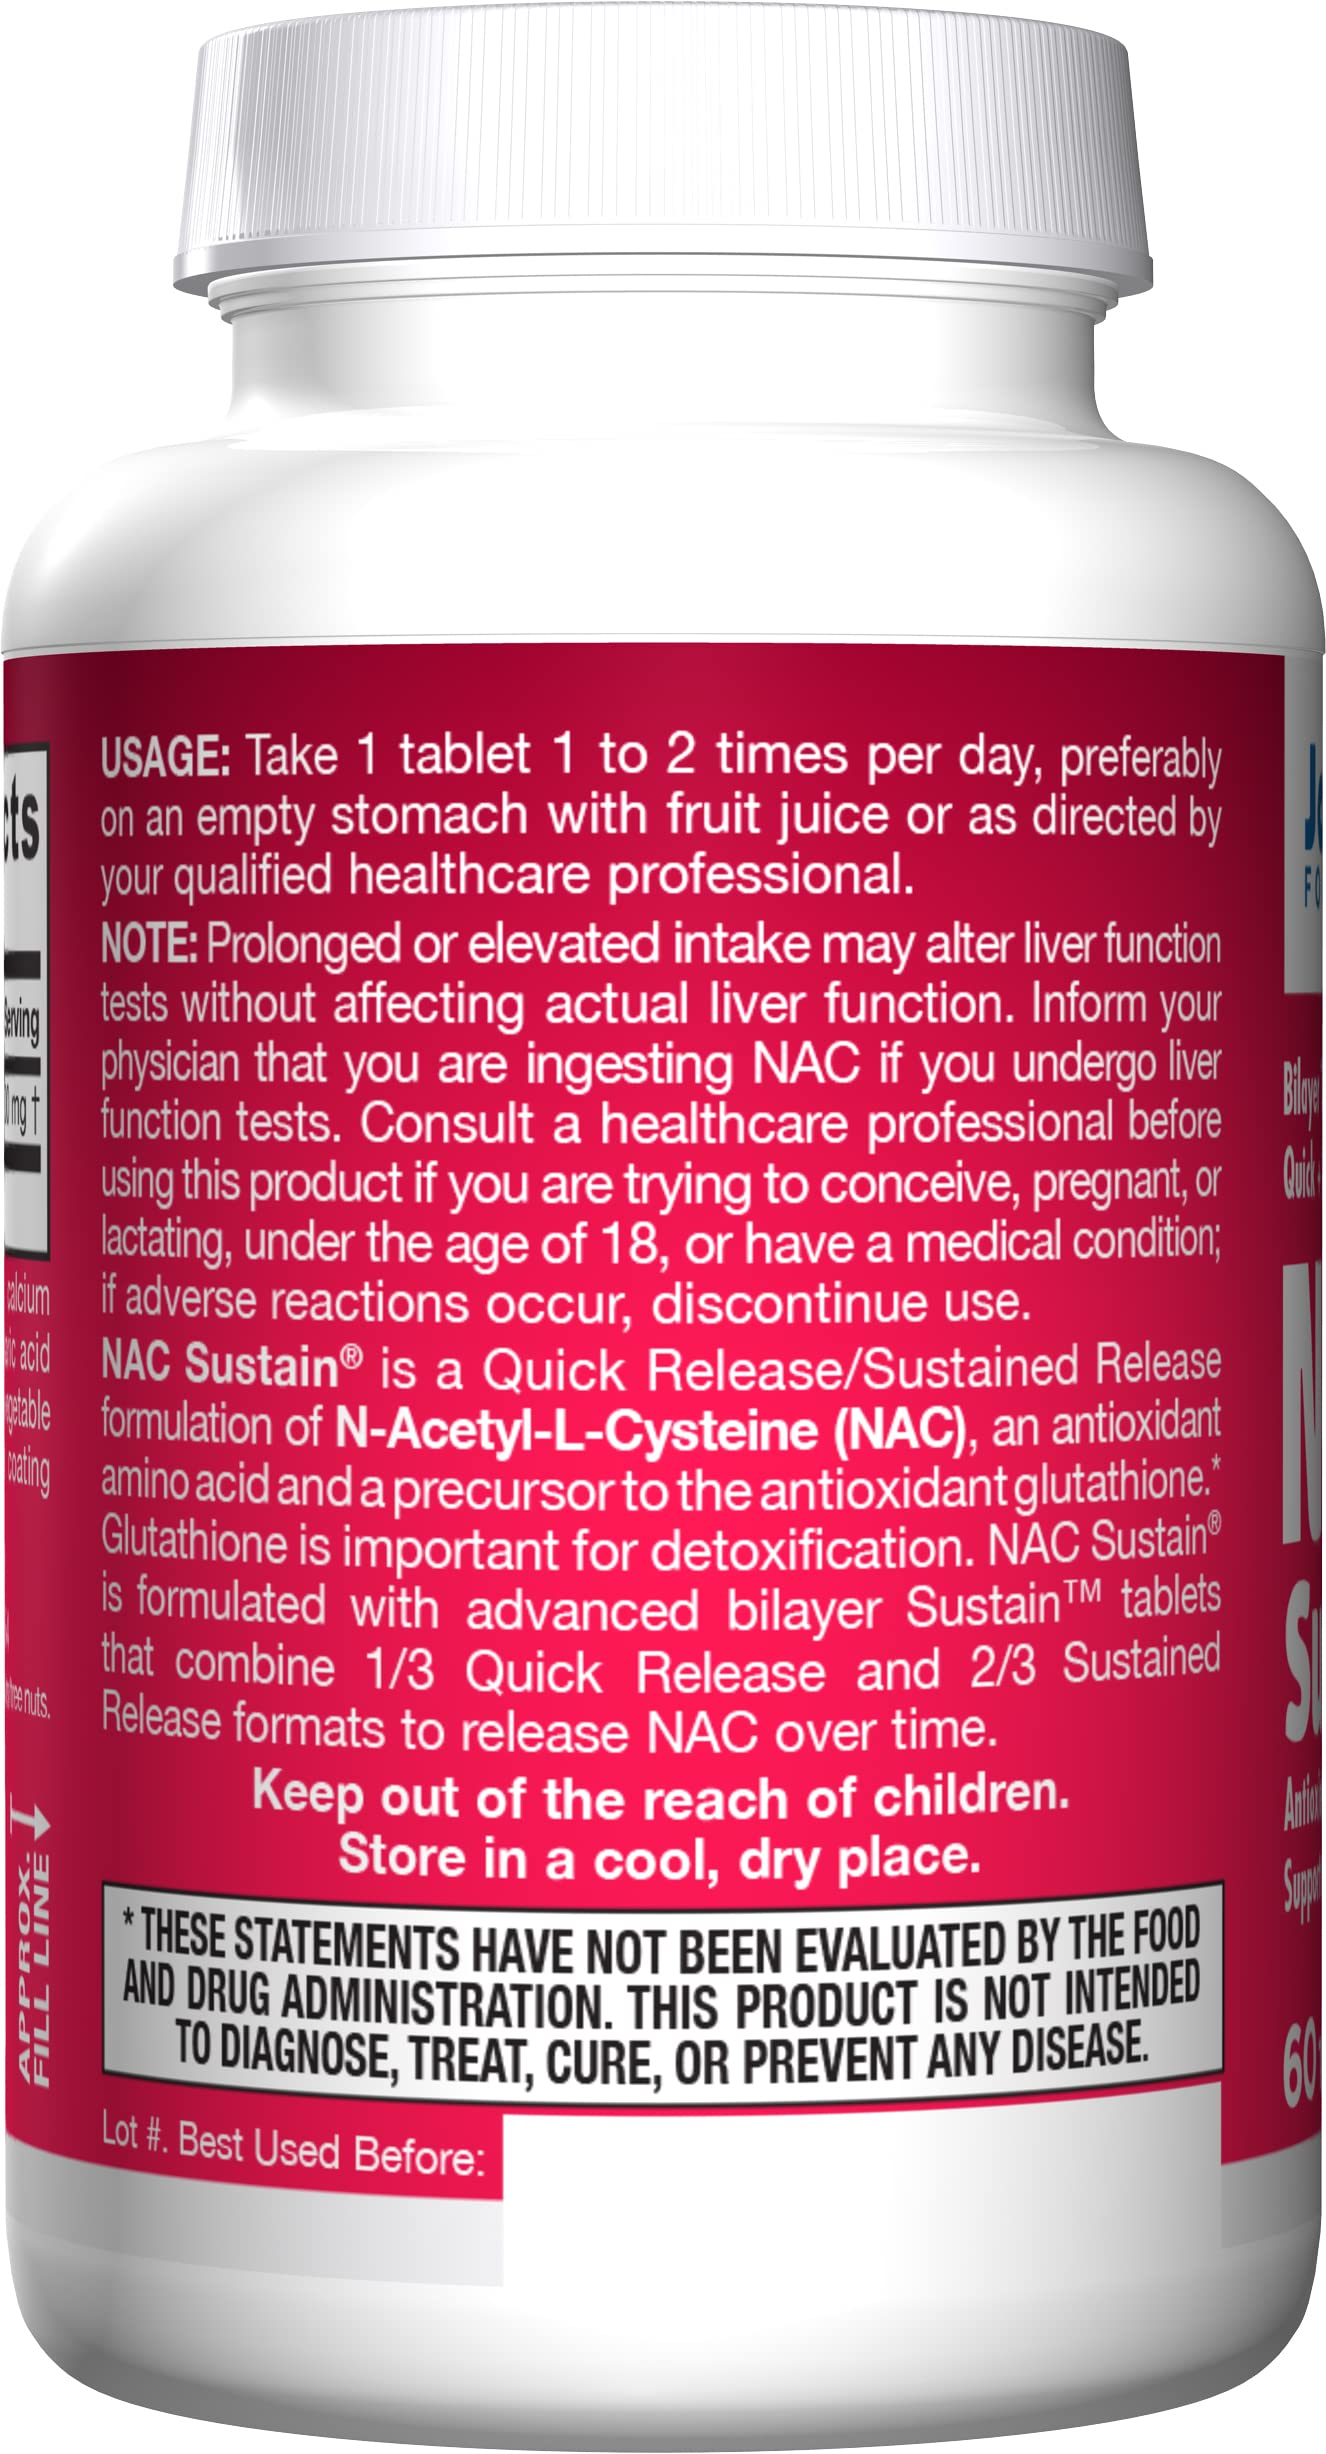 Jarrow Formulas N-A-C Sustain, Supports Liver and Lung Function, 600 Mg, 60 Sustain Tablets (Pack of 2)